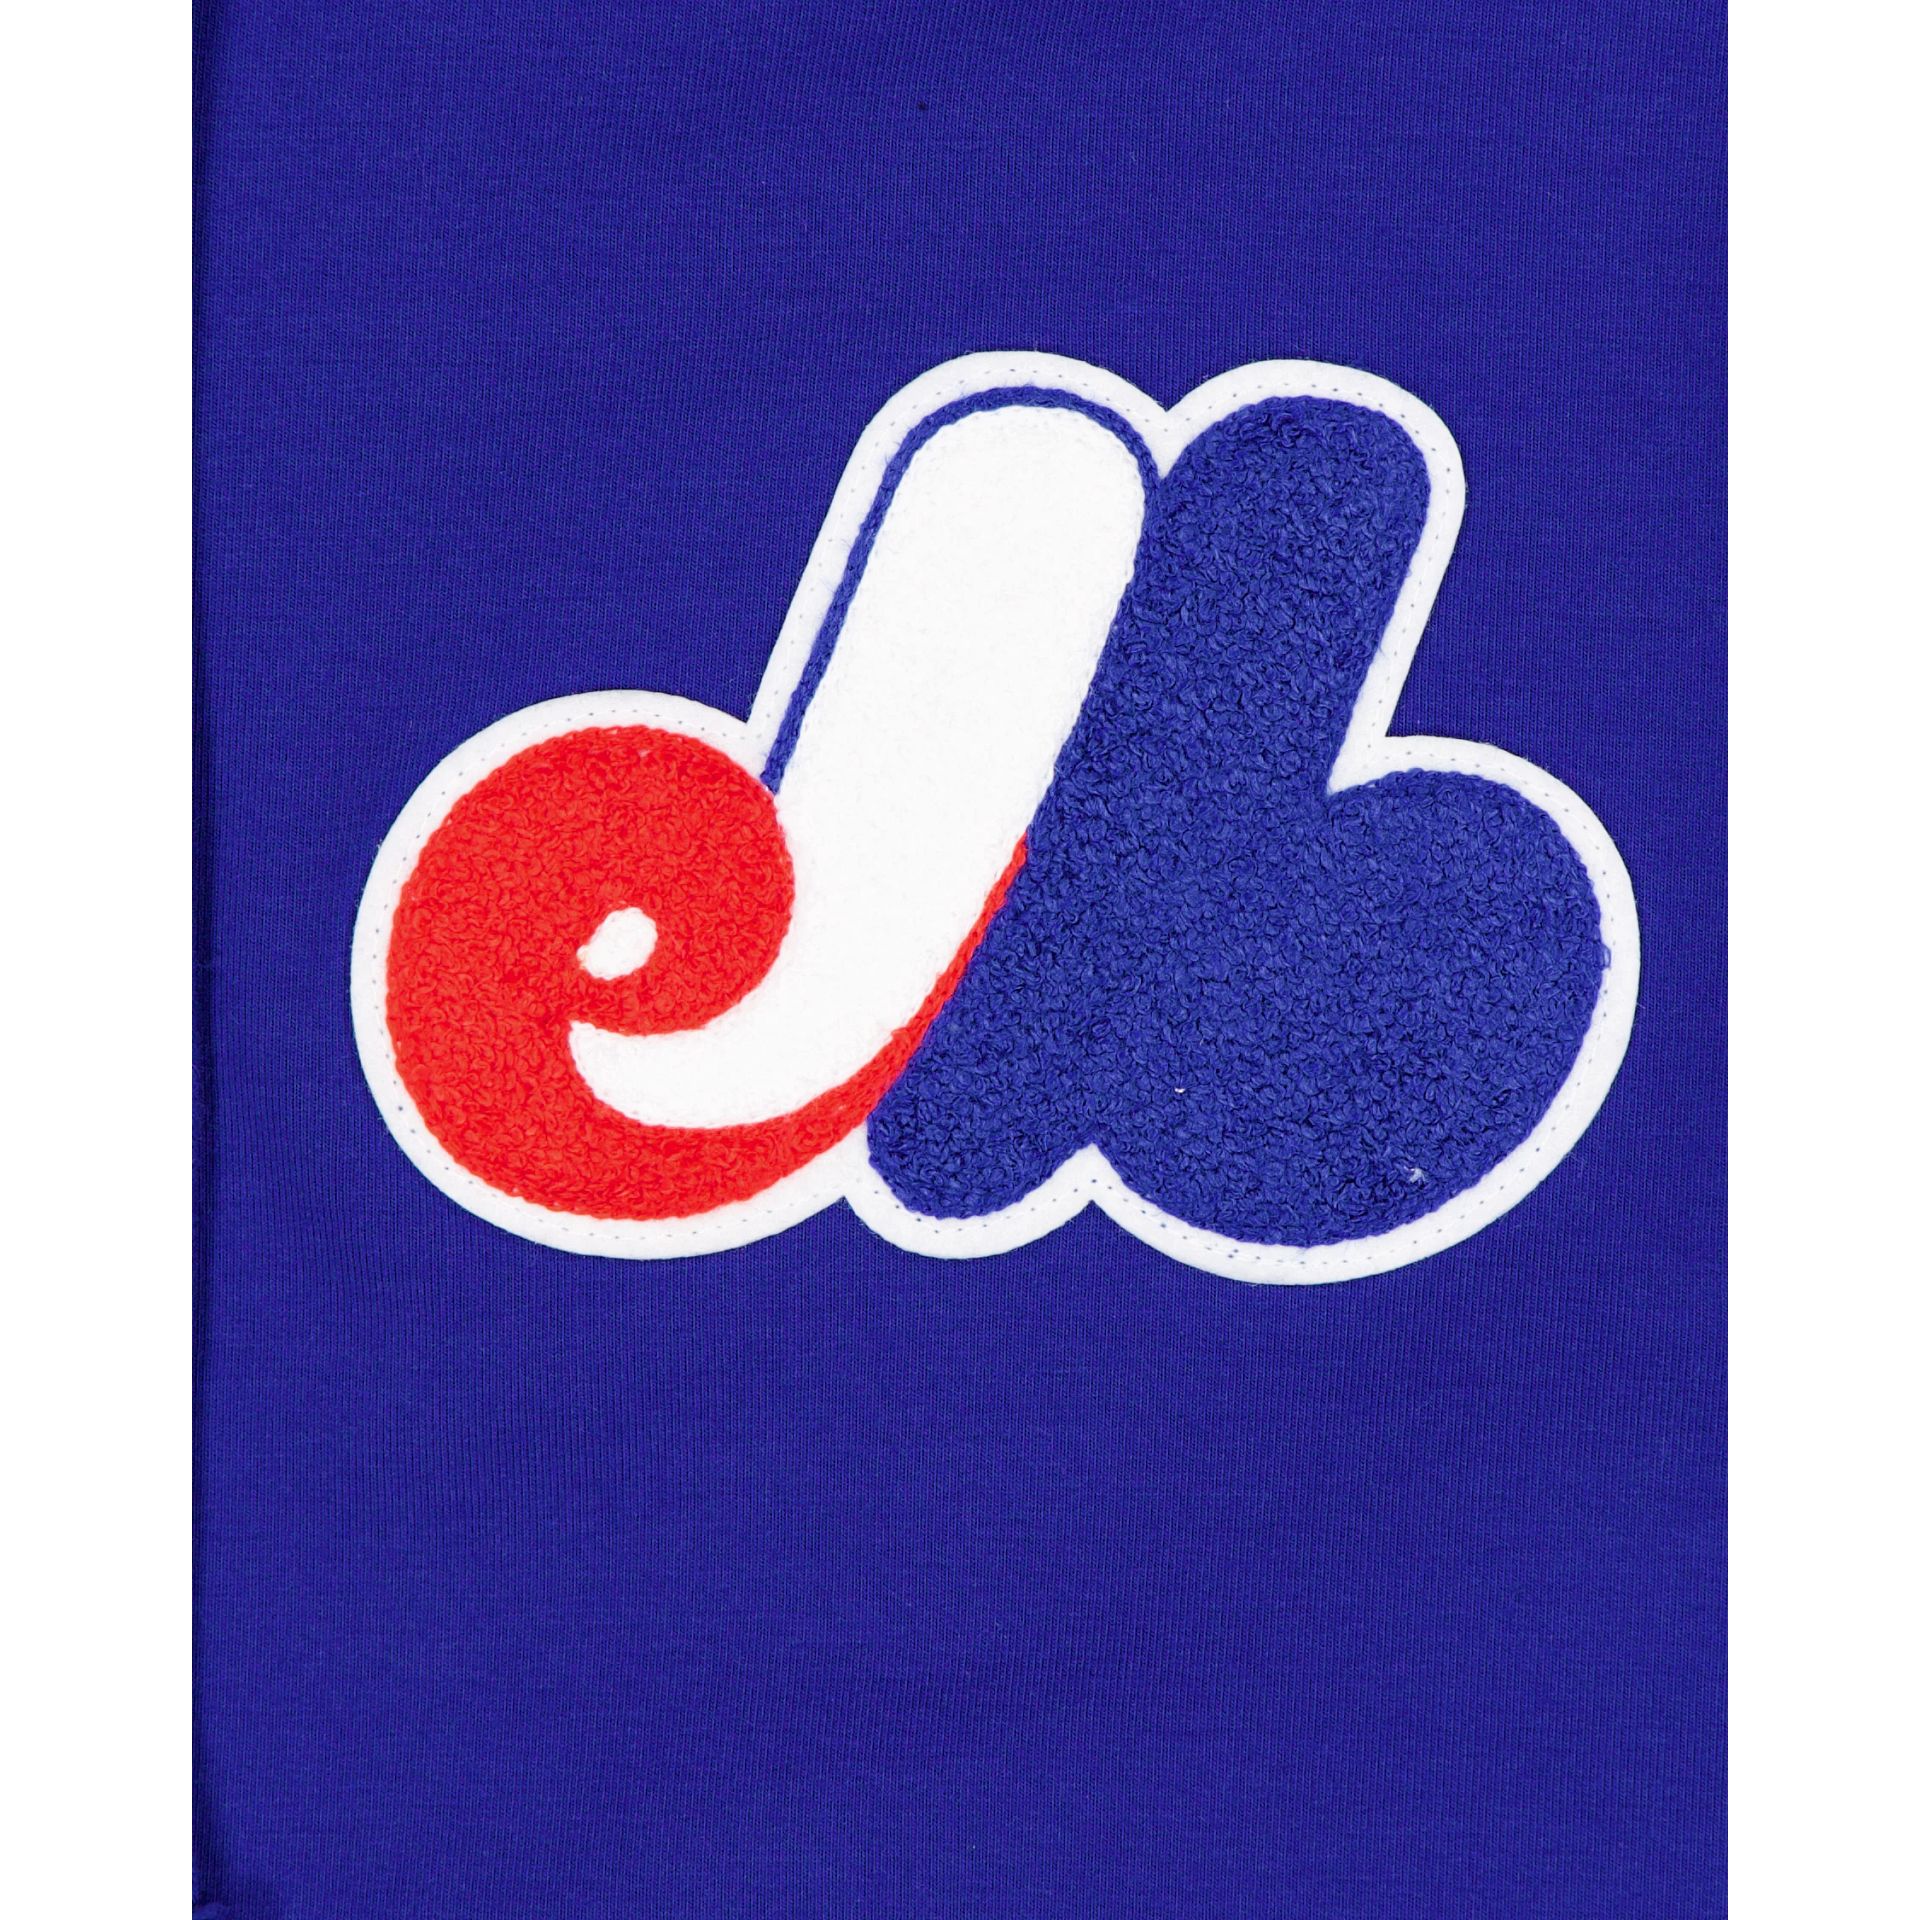 What the Montreal Expos Logo Means - YouTube